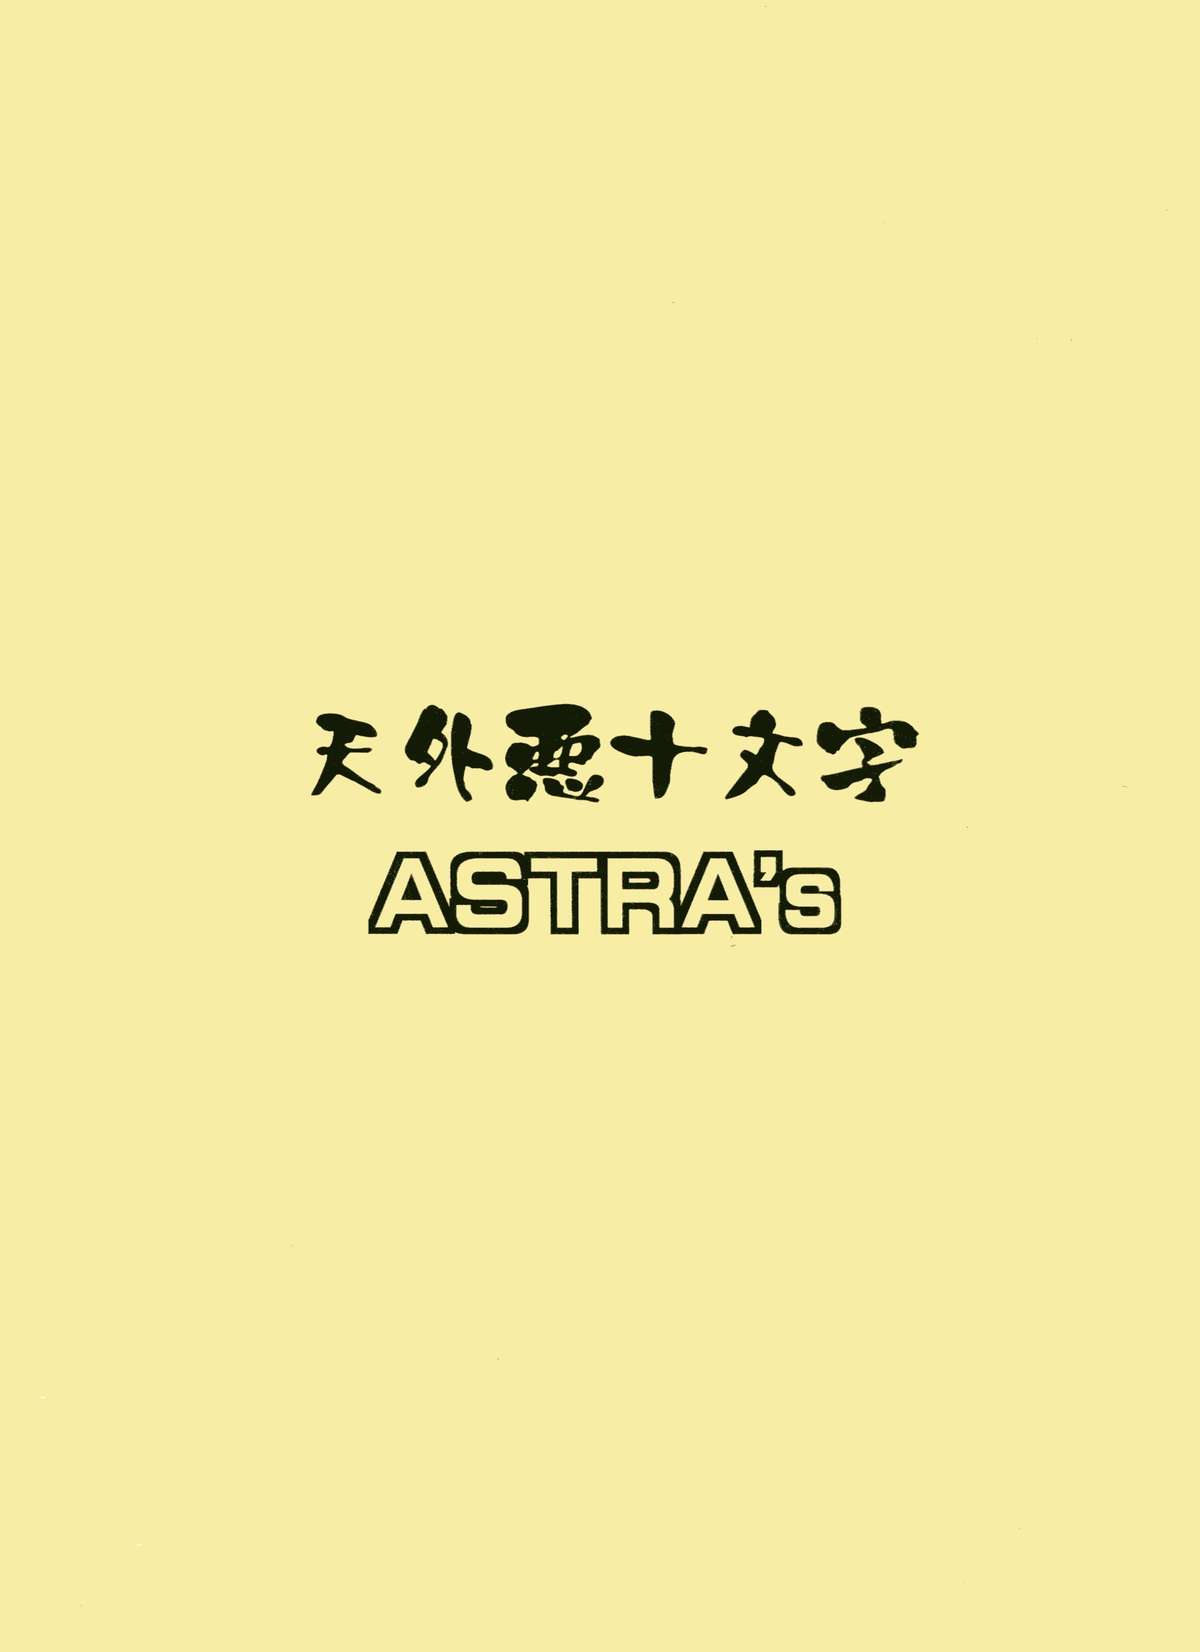 [ASTRA'S (ASTRA)] ア○ル横丁 (アニマル横町)